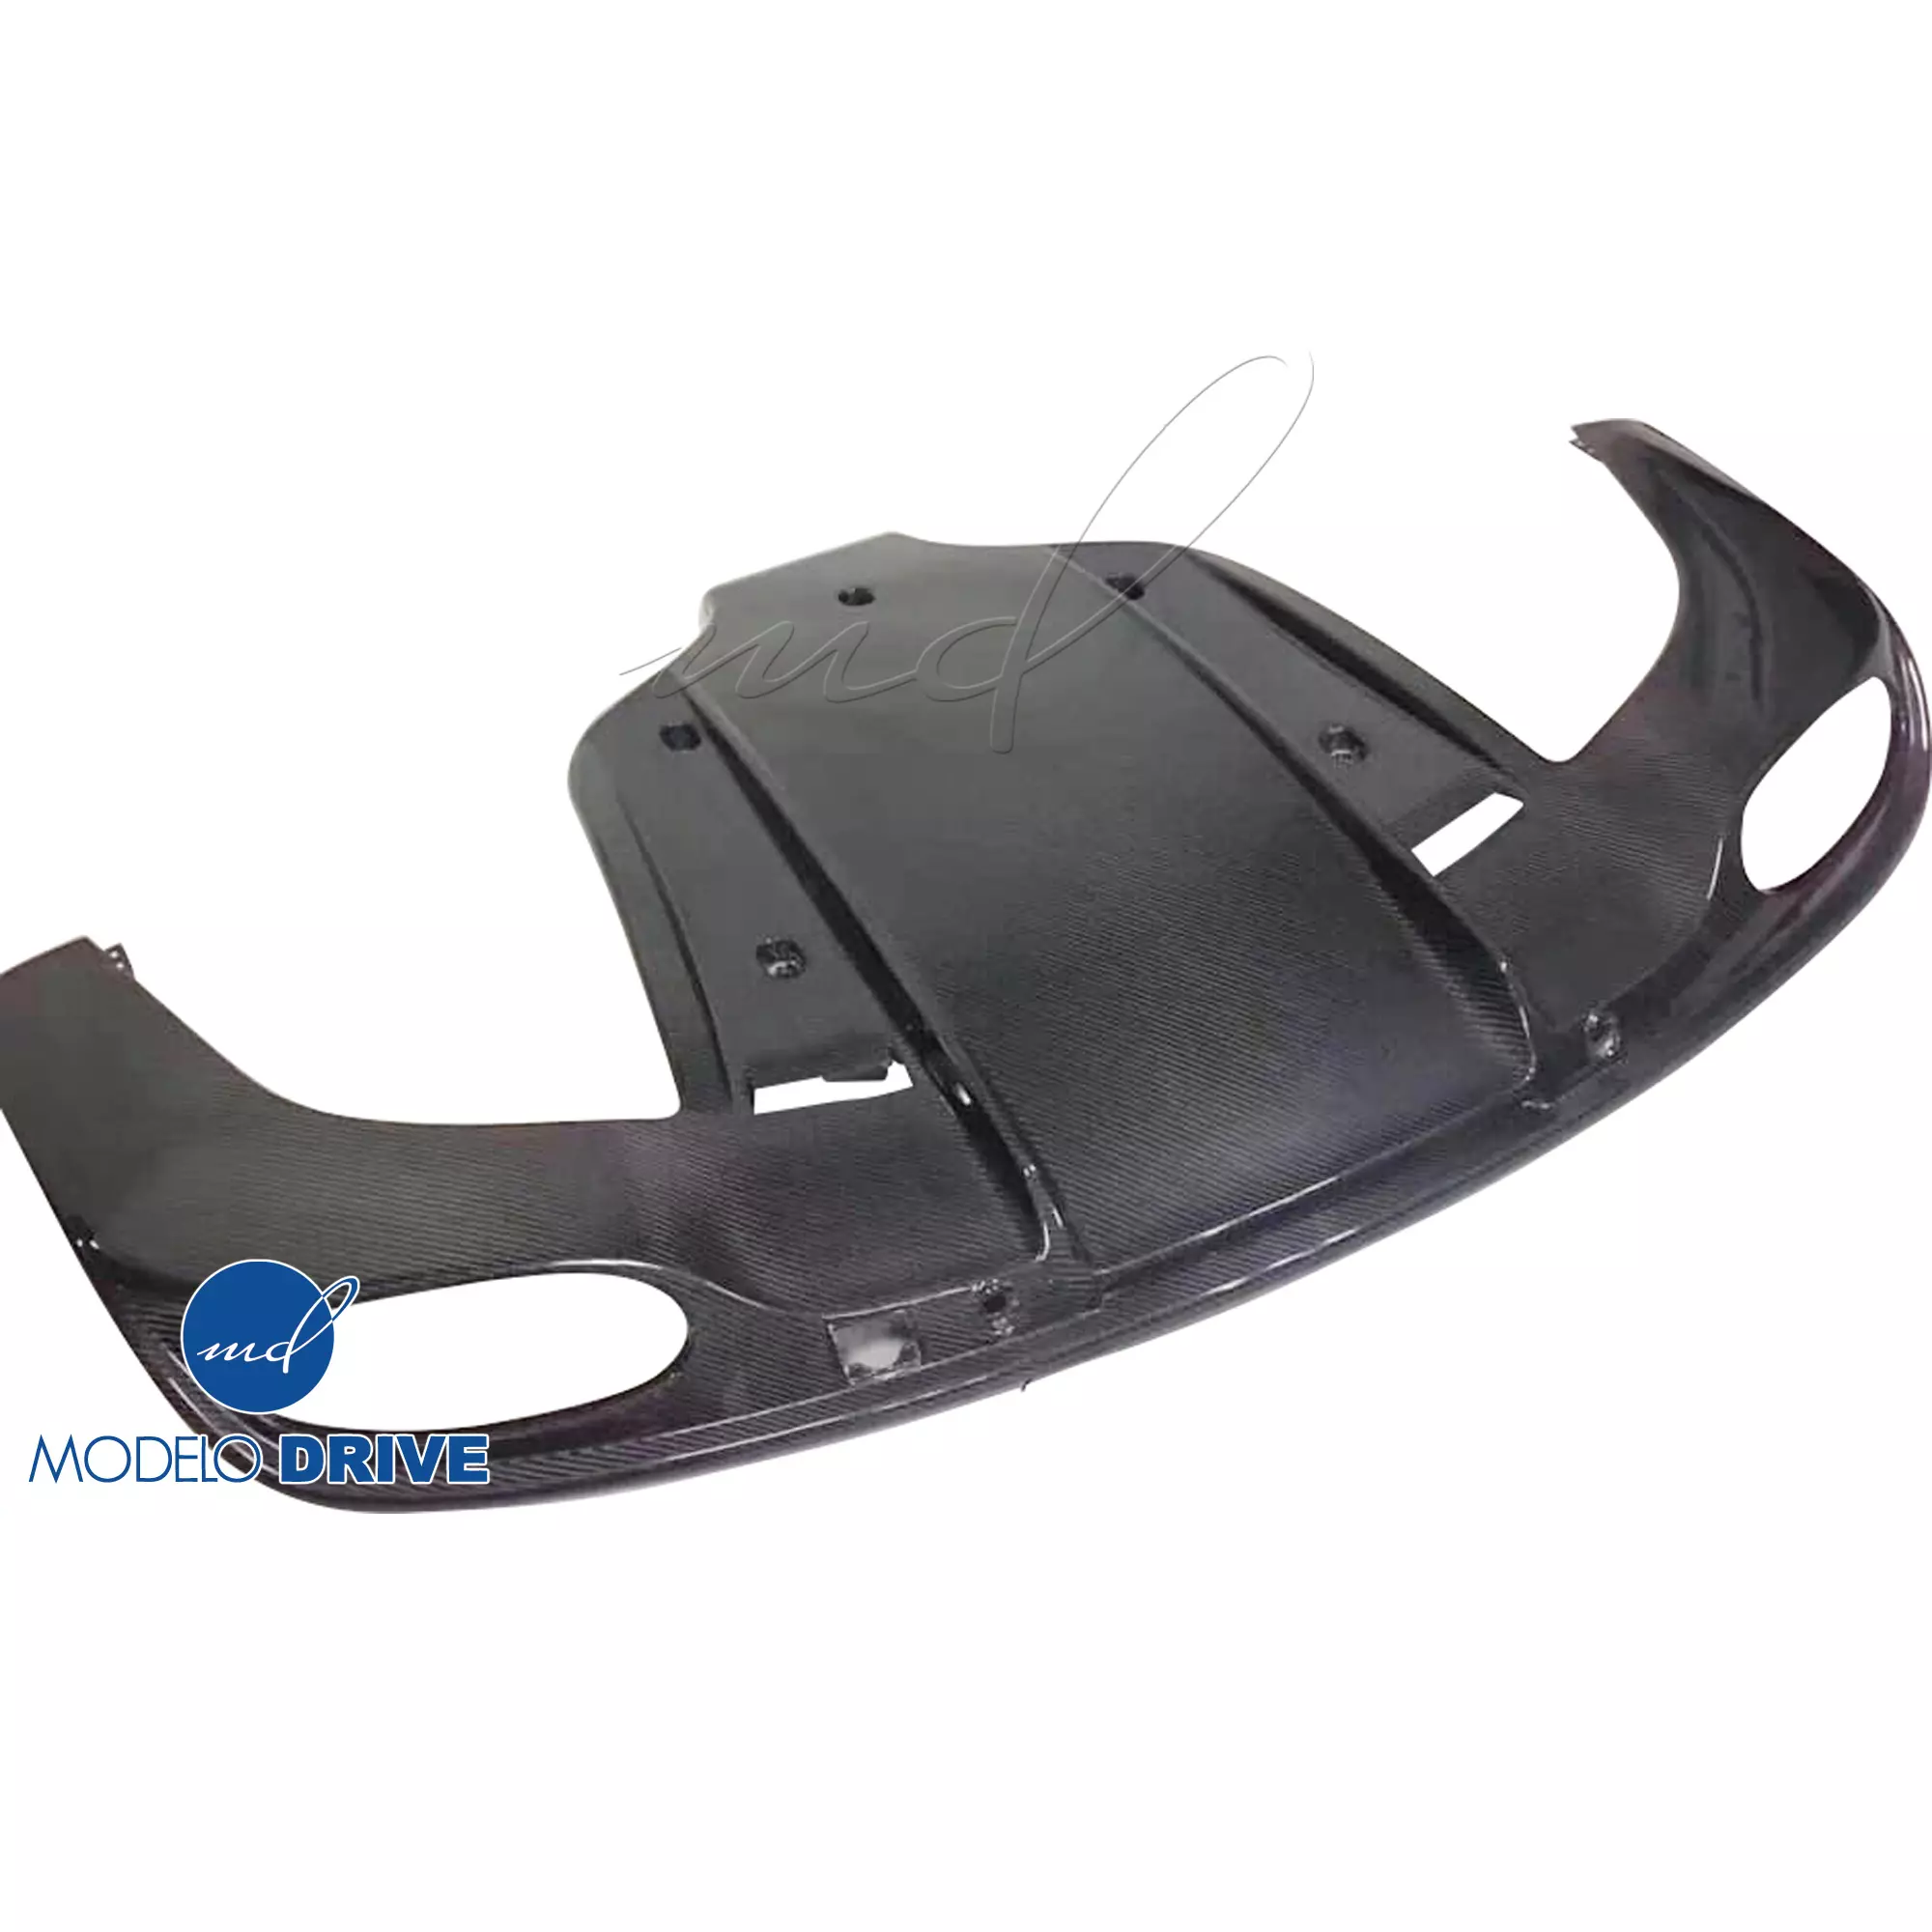 ModeloDrive Carbon Fiber MULL Rear Diffuser > Bentley Continental GT GTC 2011-2018 > 2dr Coupe - Image 8